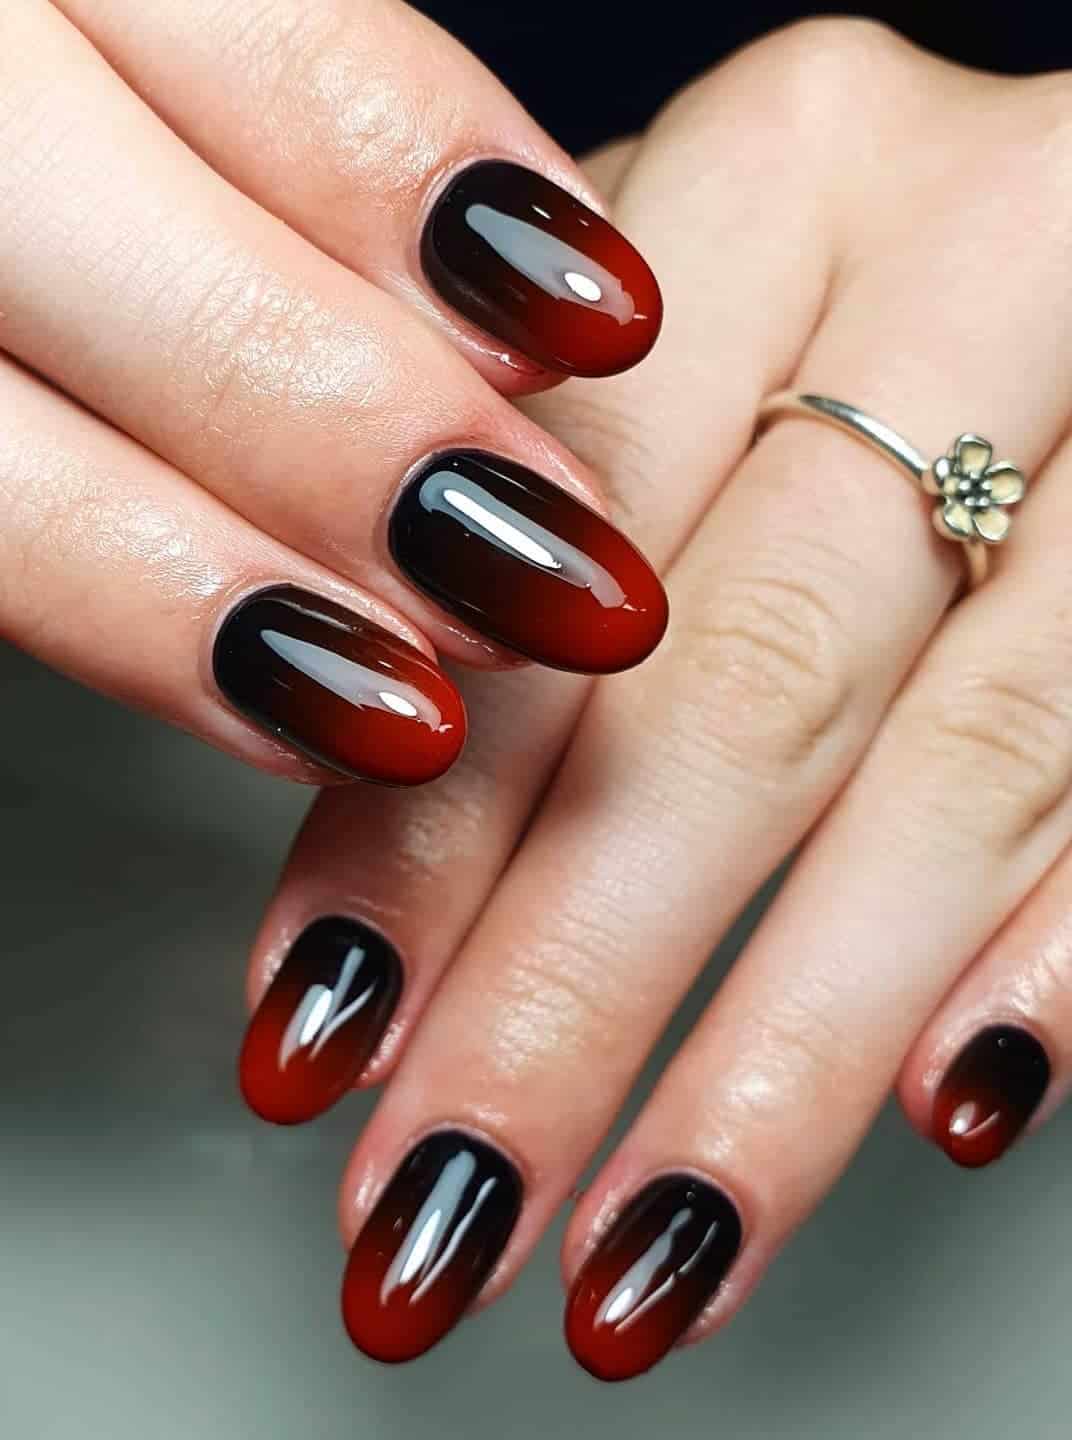 a hand with short round nails painted a glossy red and black ombre